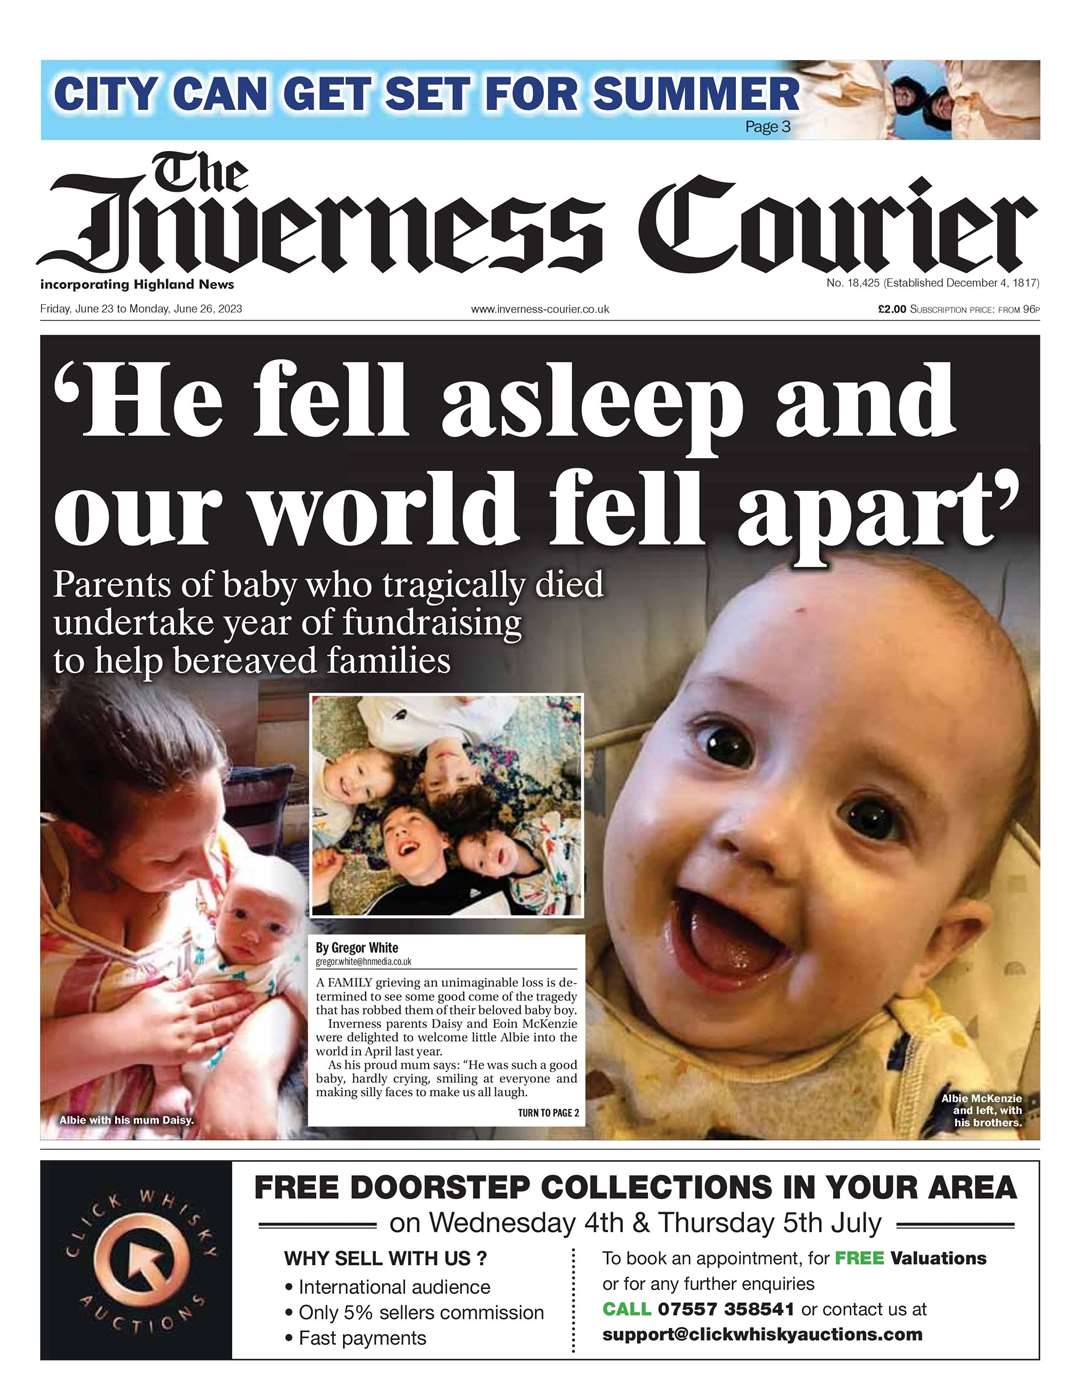 The Inverness Courier, June 23, front page.